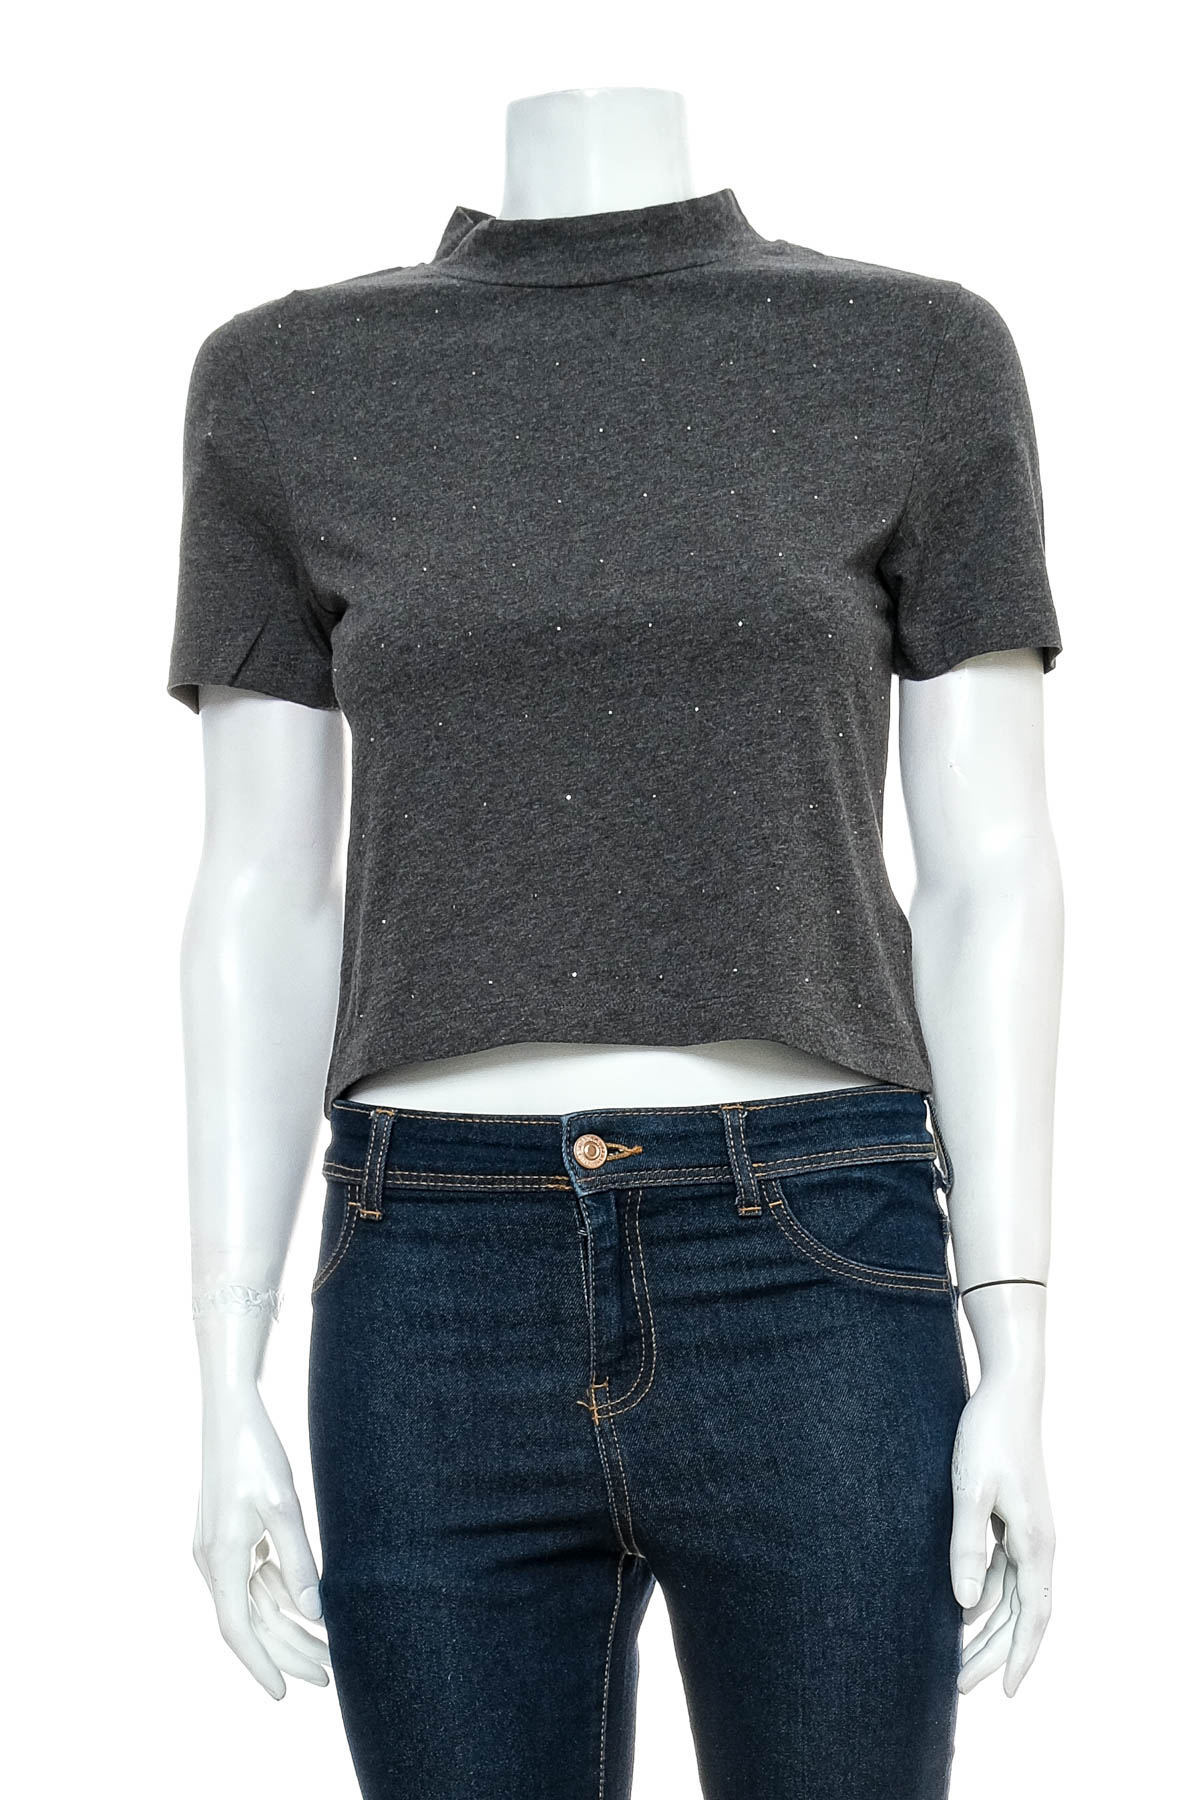 Women's t-shirt - 7 For All Mankind - 0